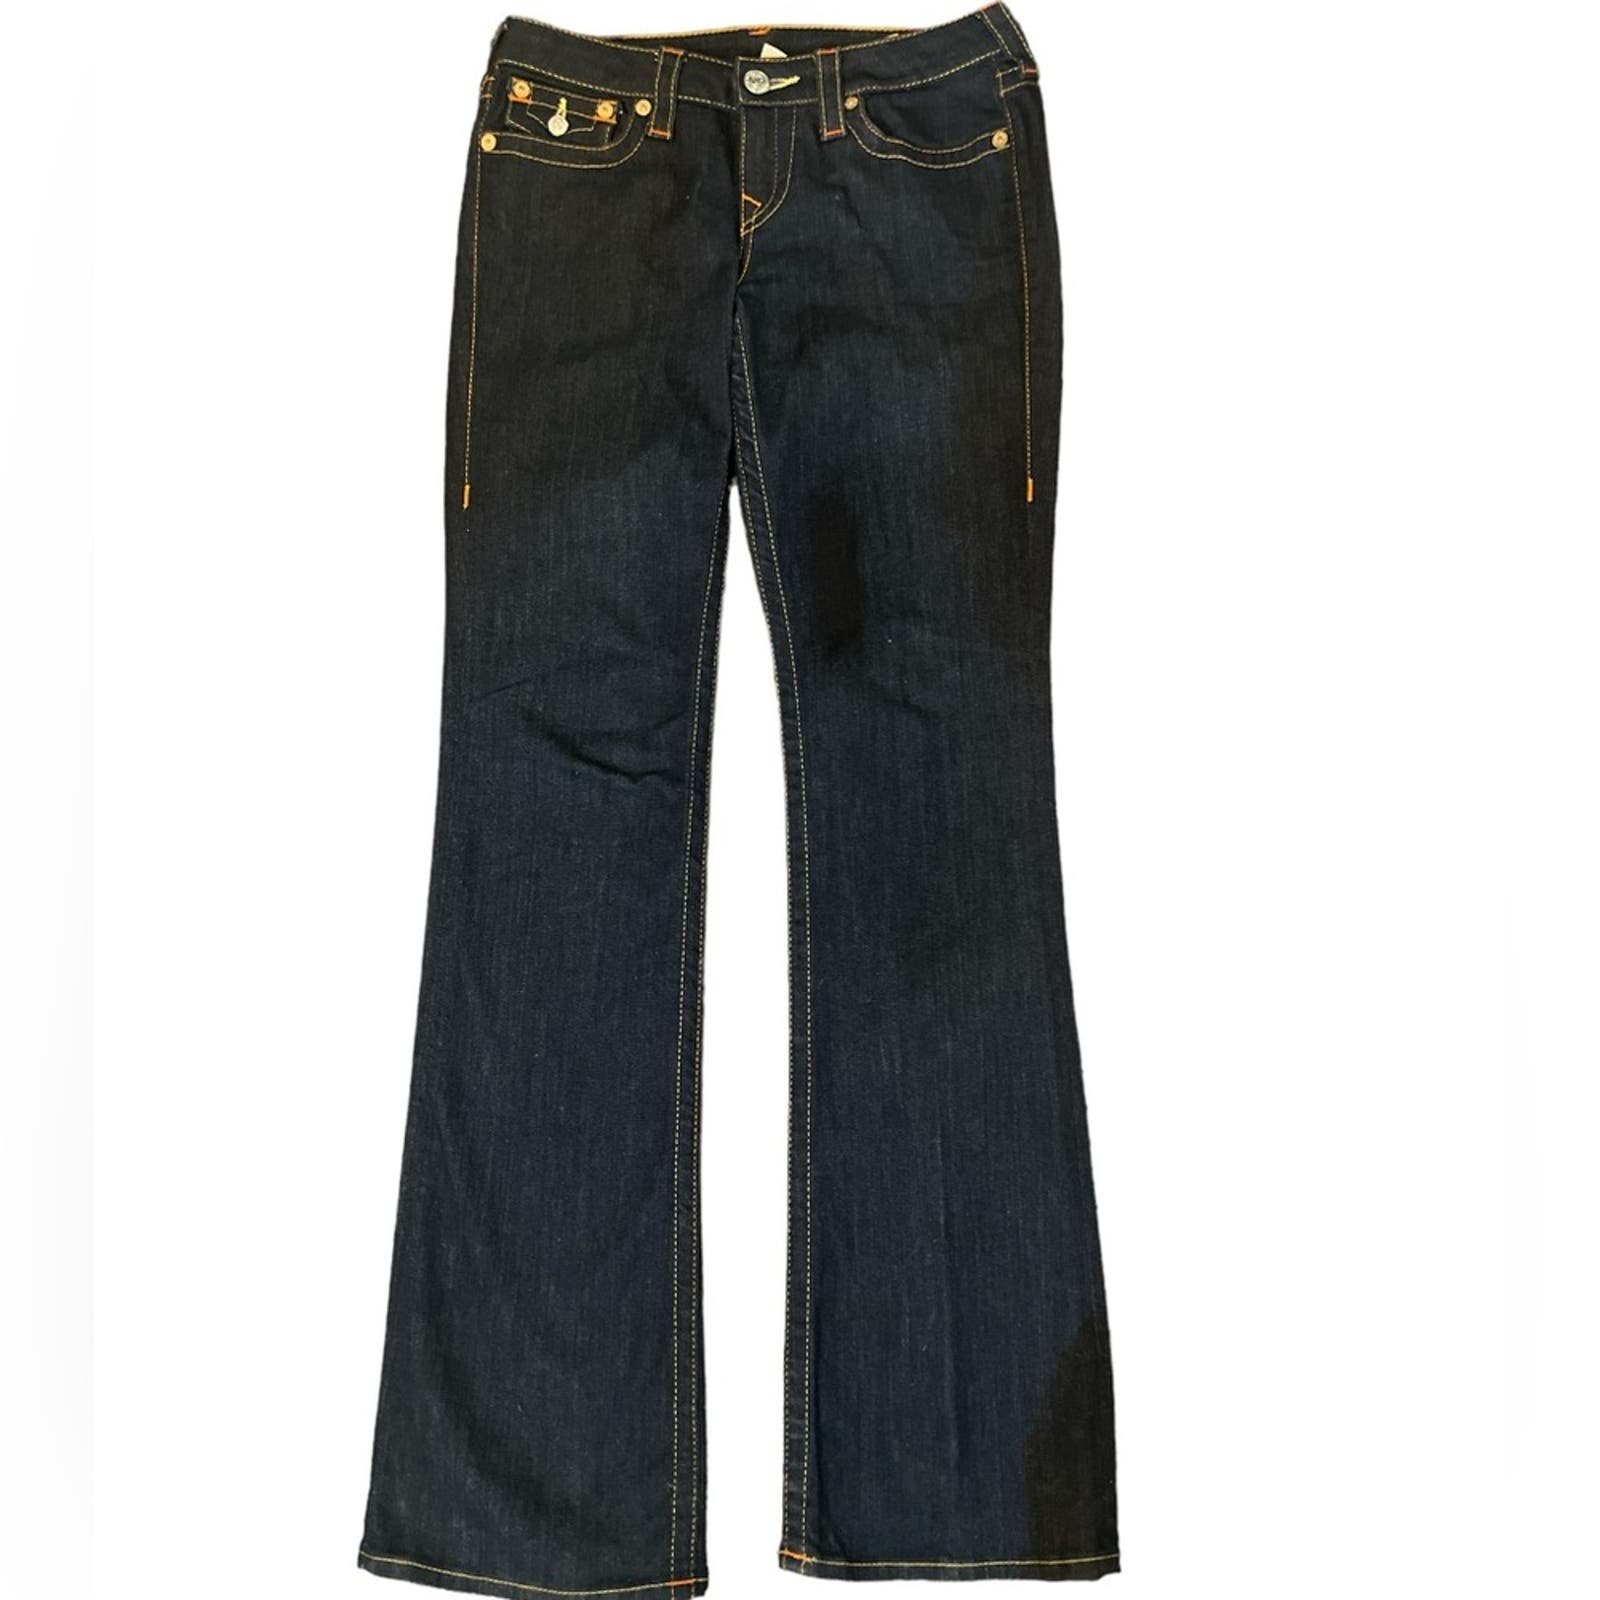 good price TRUE RELIGION BECKY LOW RISE BOOT CUT DARK WASH JEANS SIZE 28 OOgxAzwxL online store